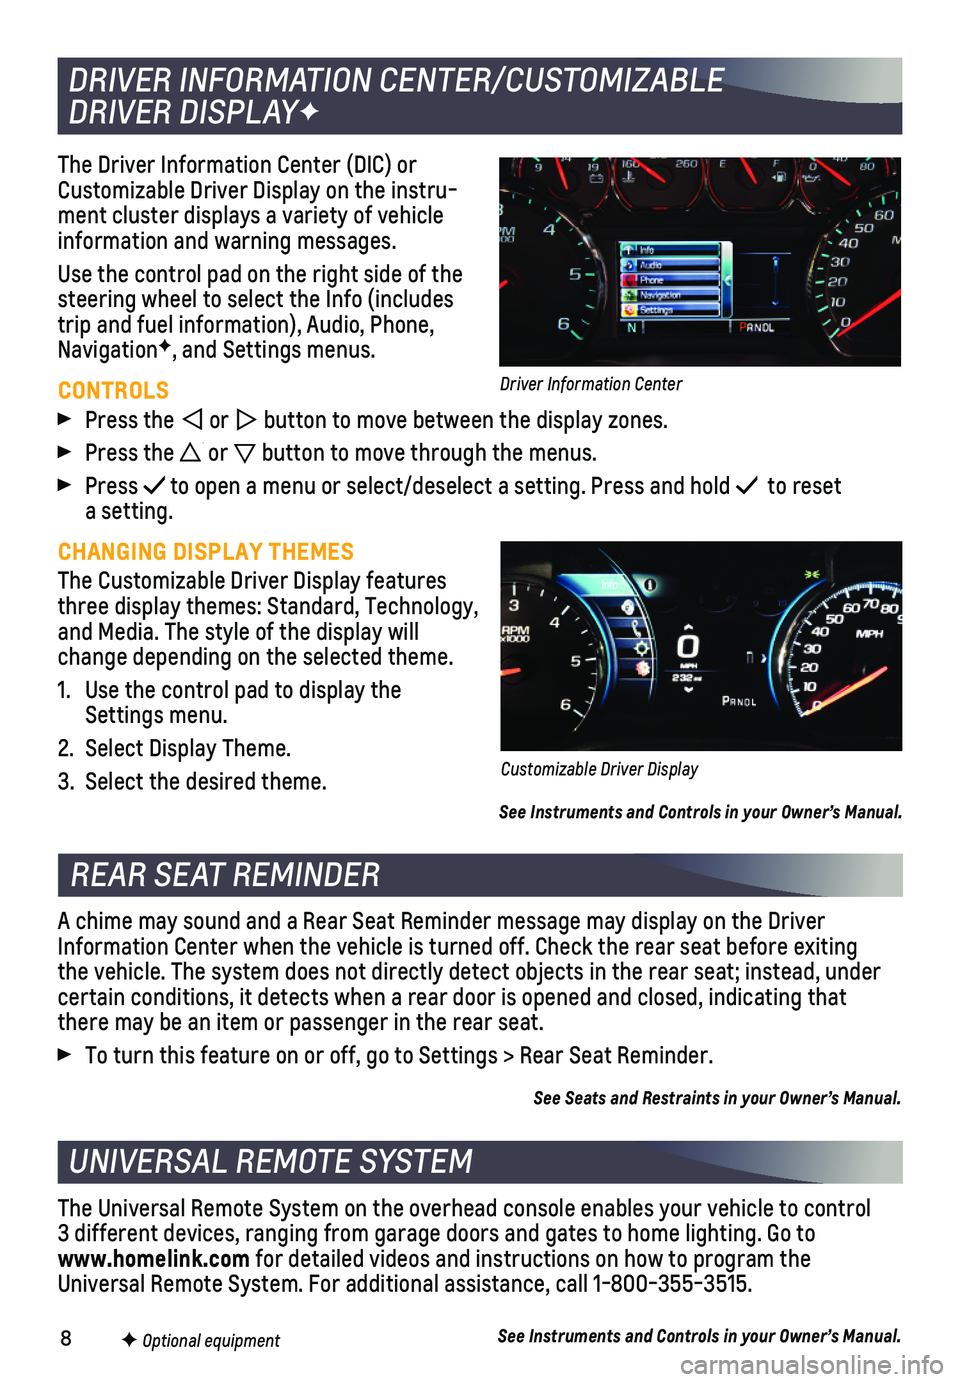 CHEVROLET SUBURBAN 2018  Get To Know Guide 8
The Driver Information Center (DIC) or Customizable Driver Display on the instru-ment cluster displays a variety of vehicle information and warning messages.
Use the control pad on the right side of